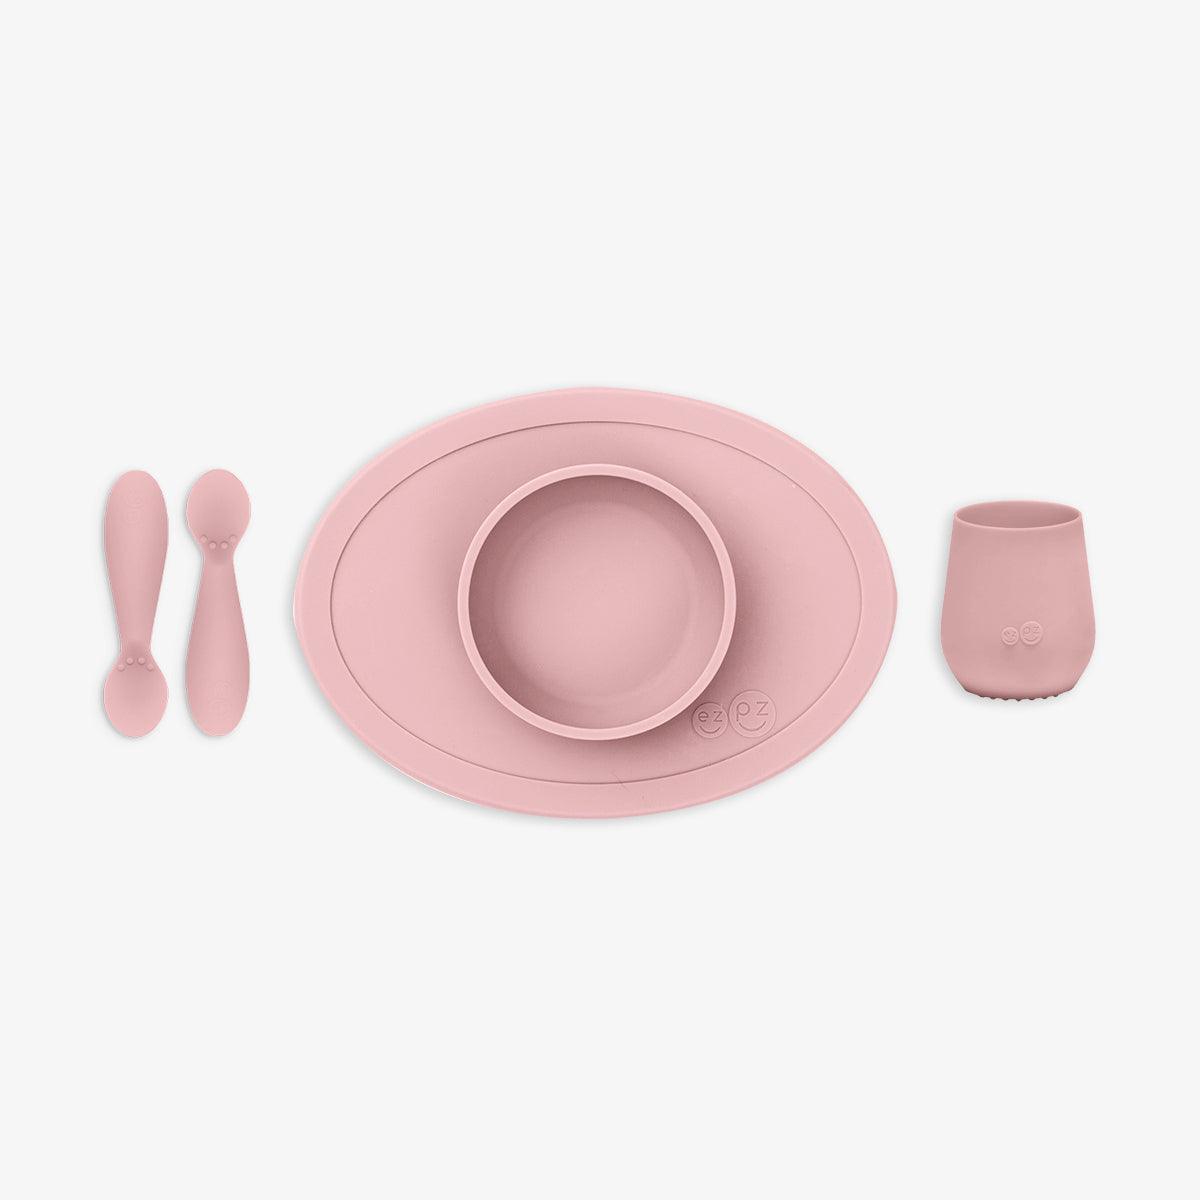 Silicone First Foods Set - ezpz - Why and Whale